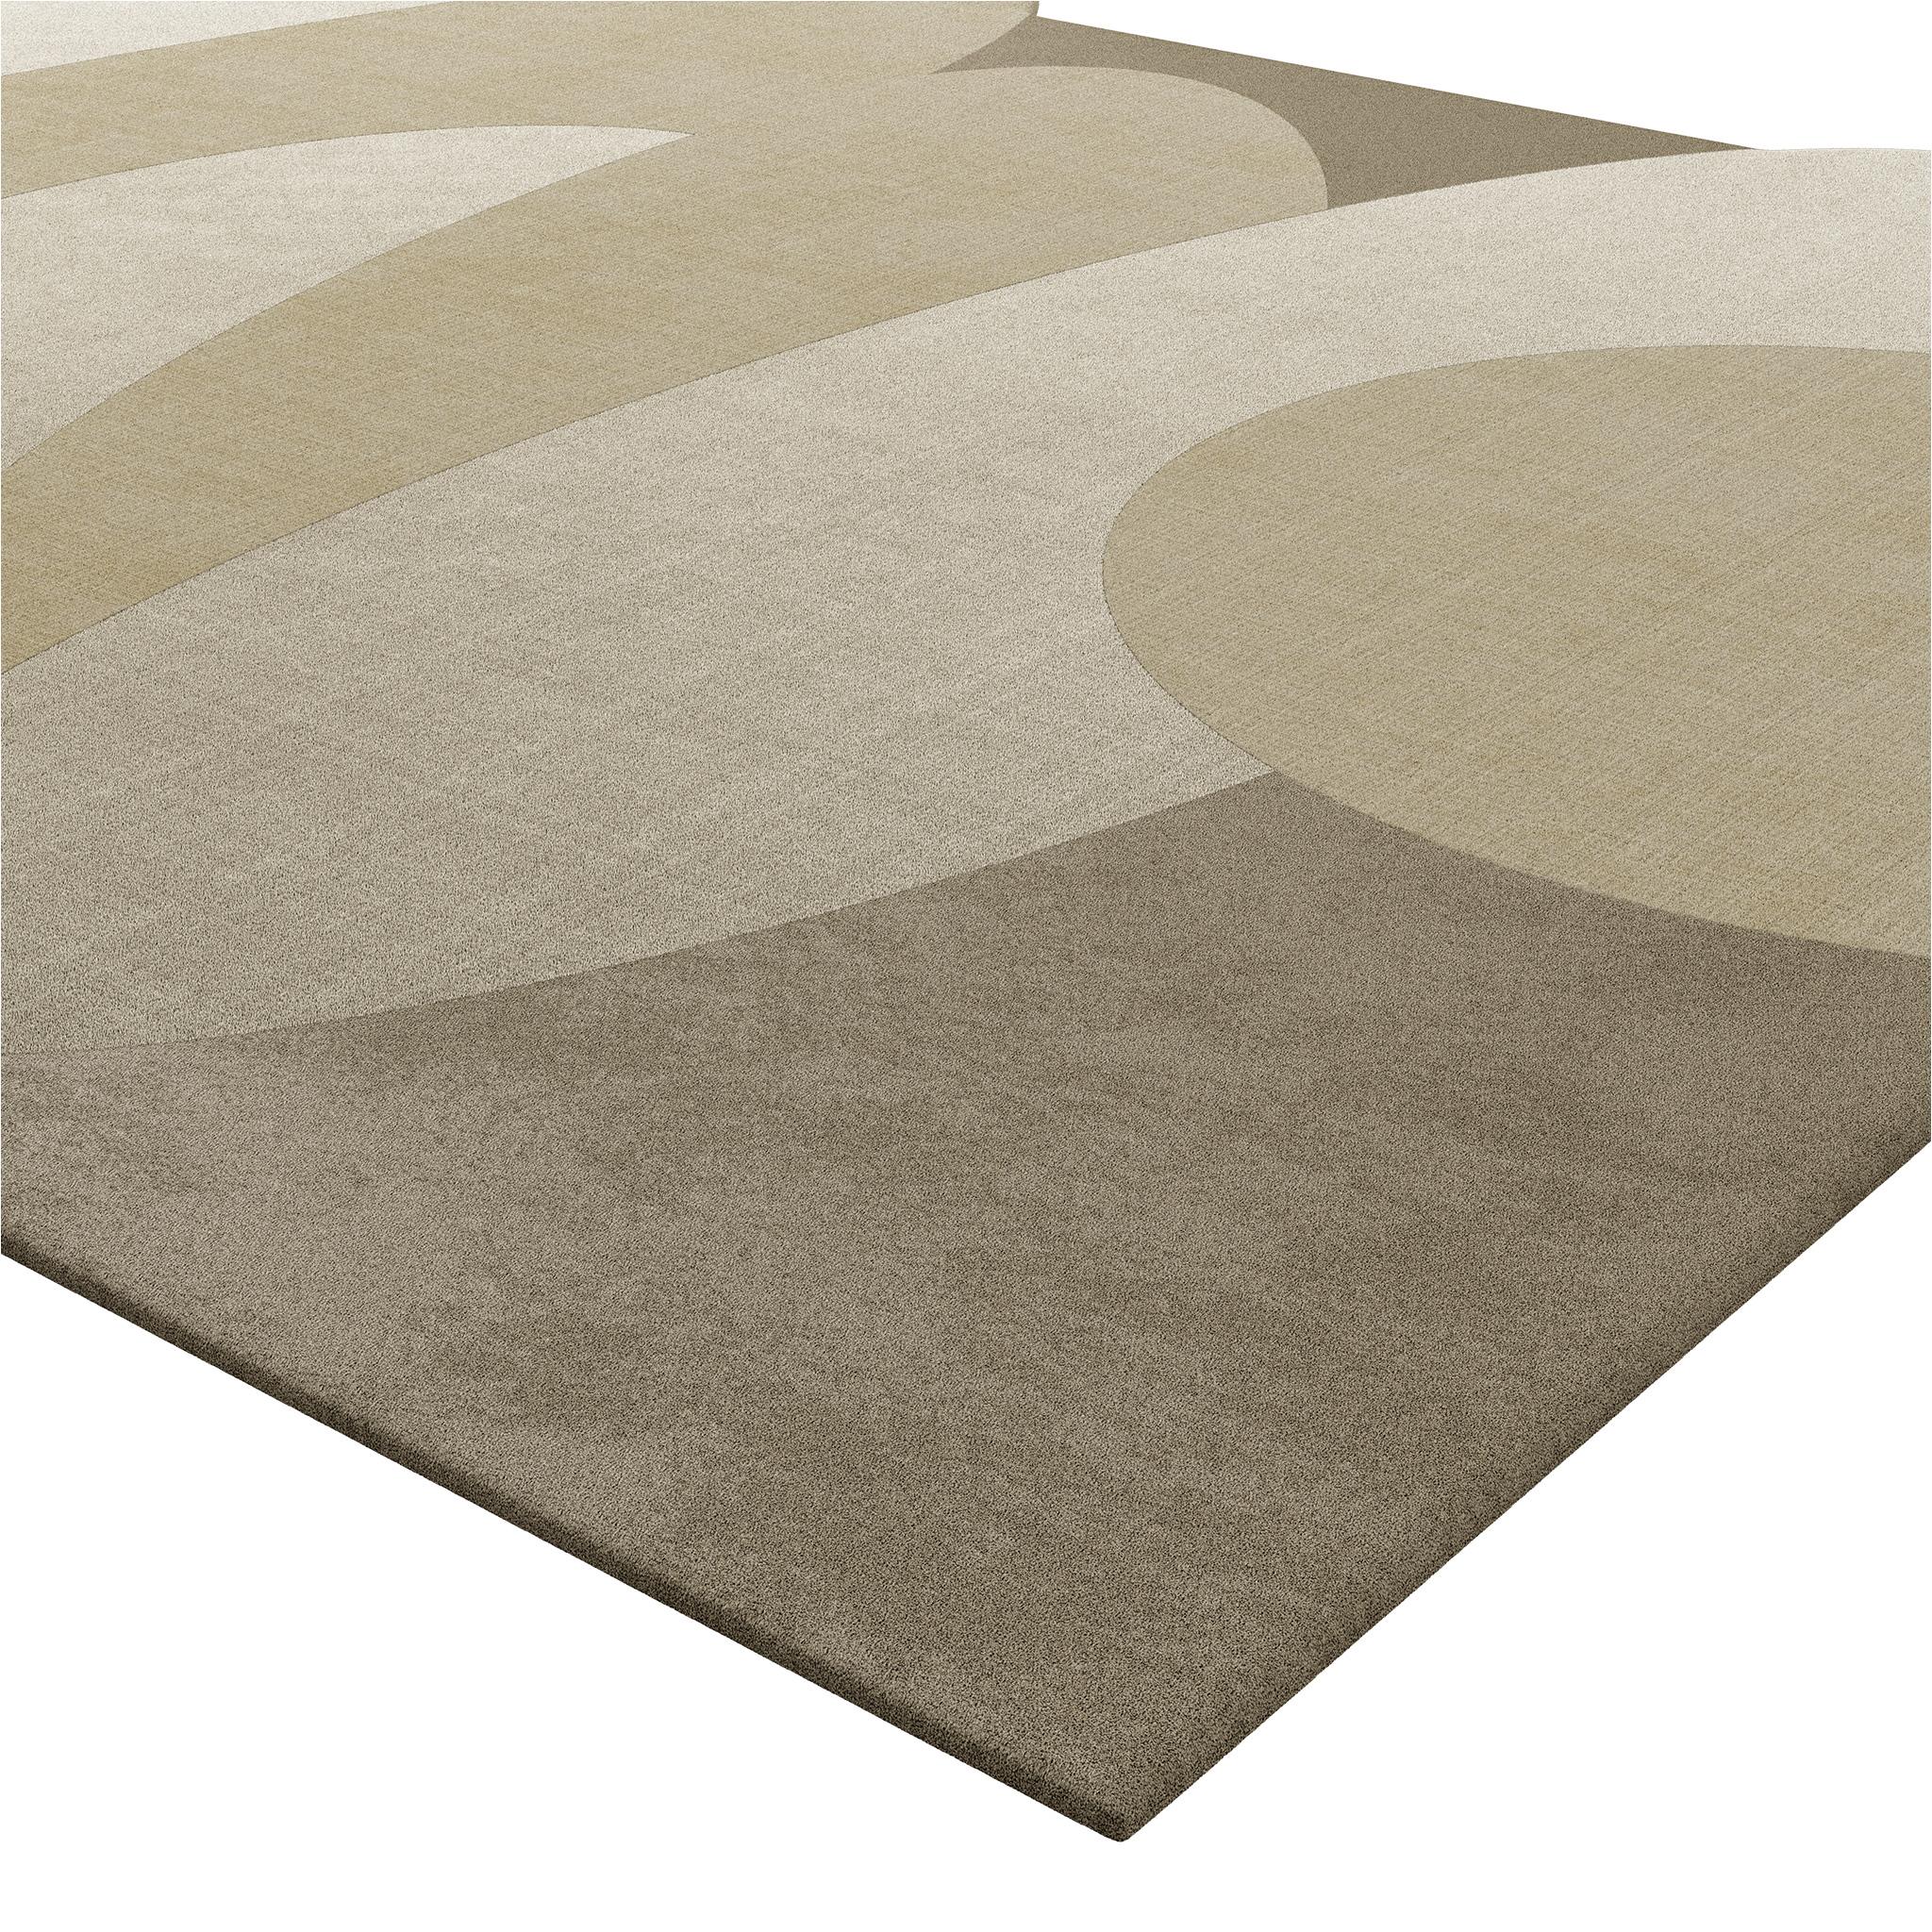 Hand-Crafted Modern Customizable Organic Irregular Shaped Rug Abstract Pattern Beige Shades For Sale